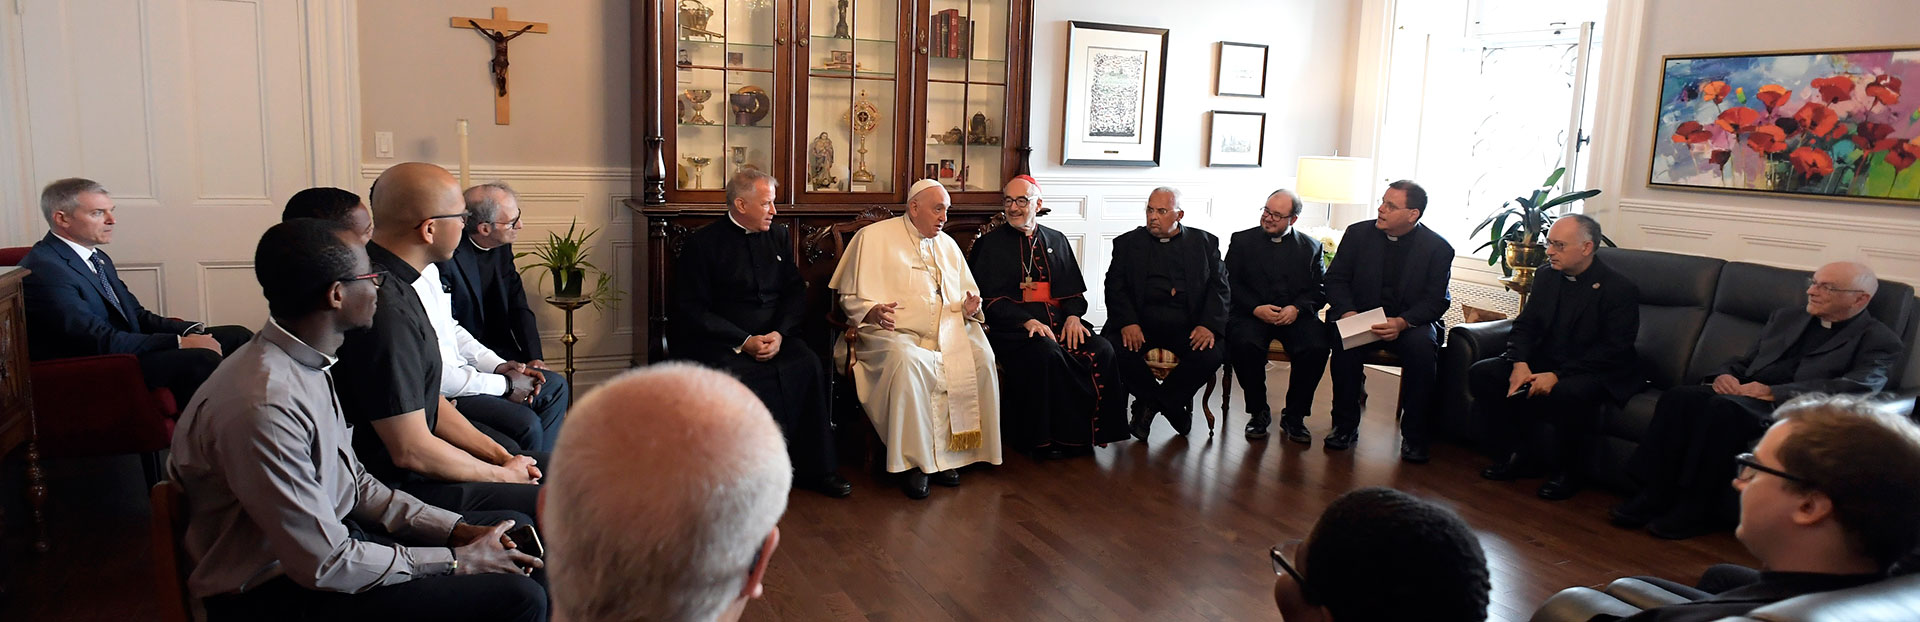 Pope Francis with his Jesuit companions in Quebec City